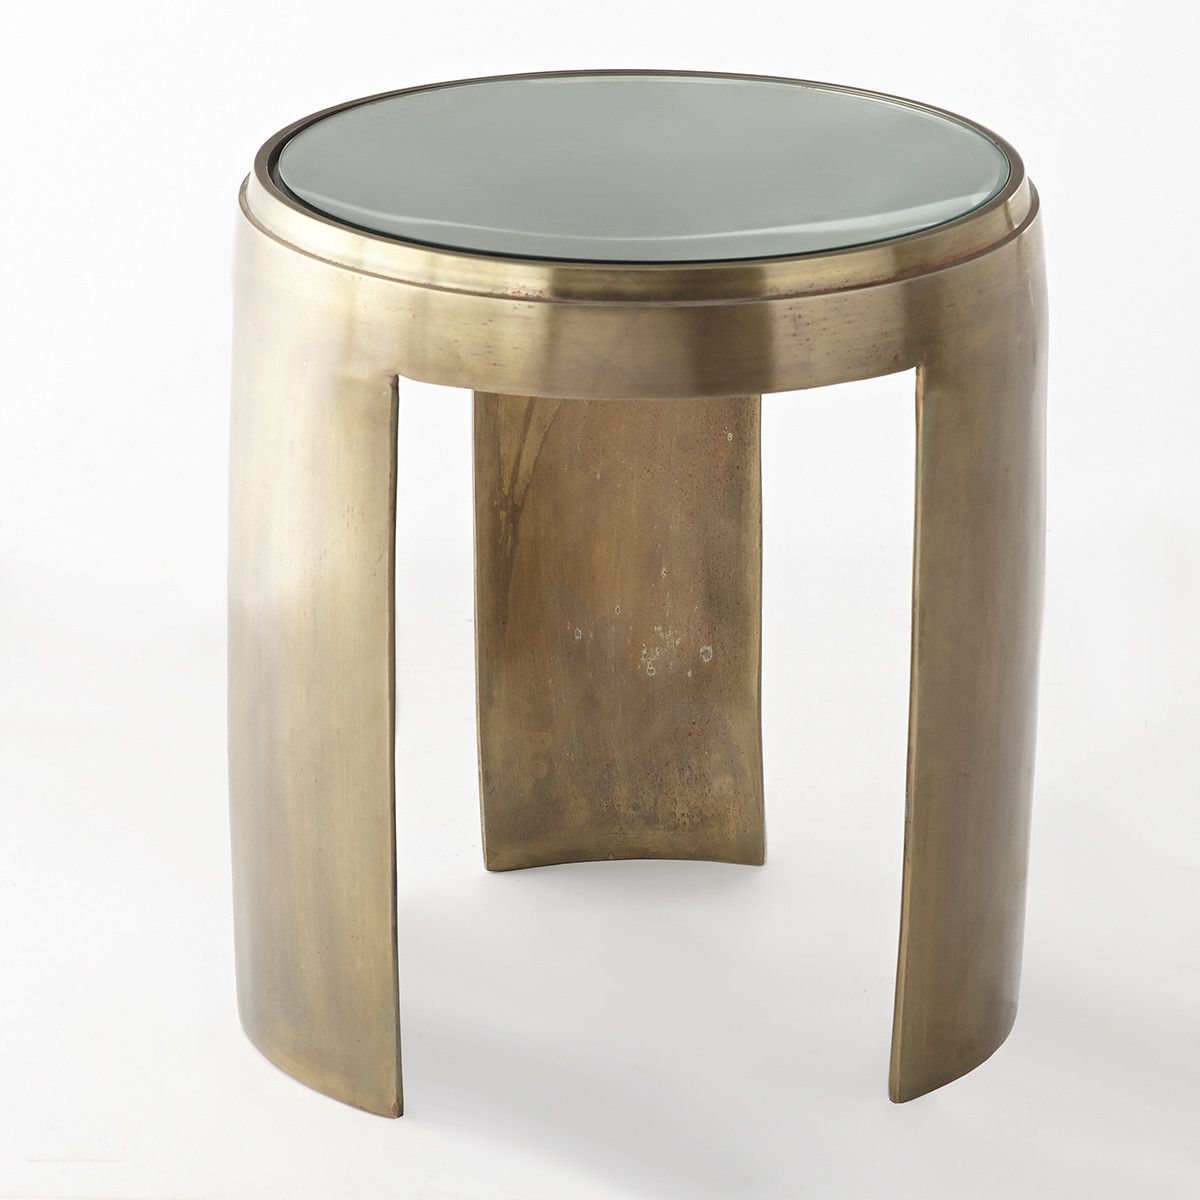 Concave Side Table – Antiqued Glass Tripod Curved Leg Regarding Most Current Coffee Tables With Tripod Legs (Gallery 14 of 20)